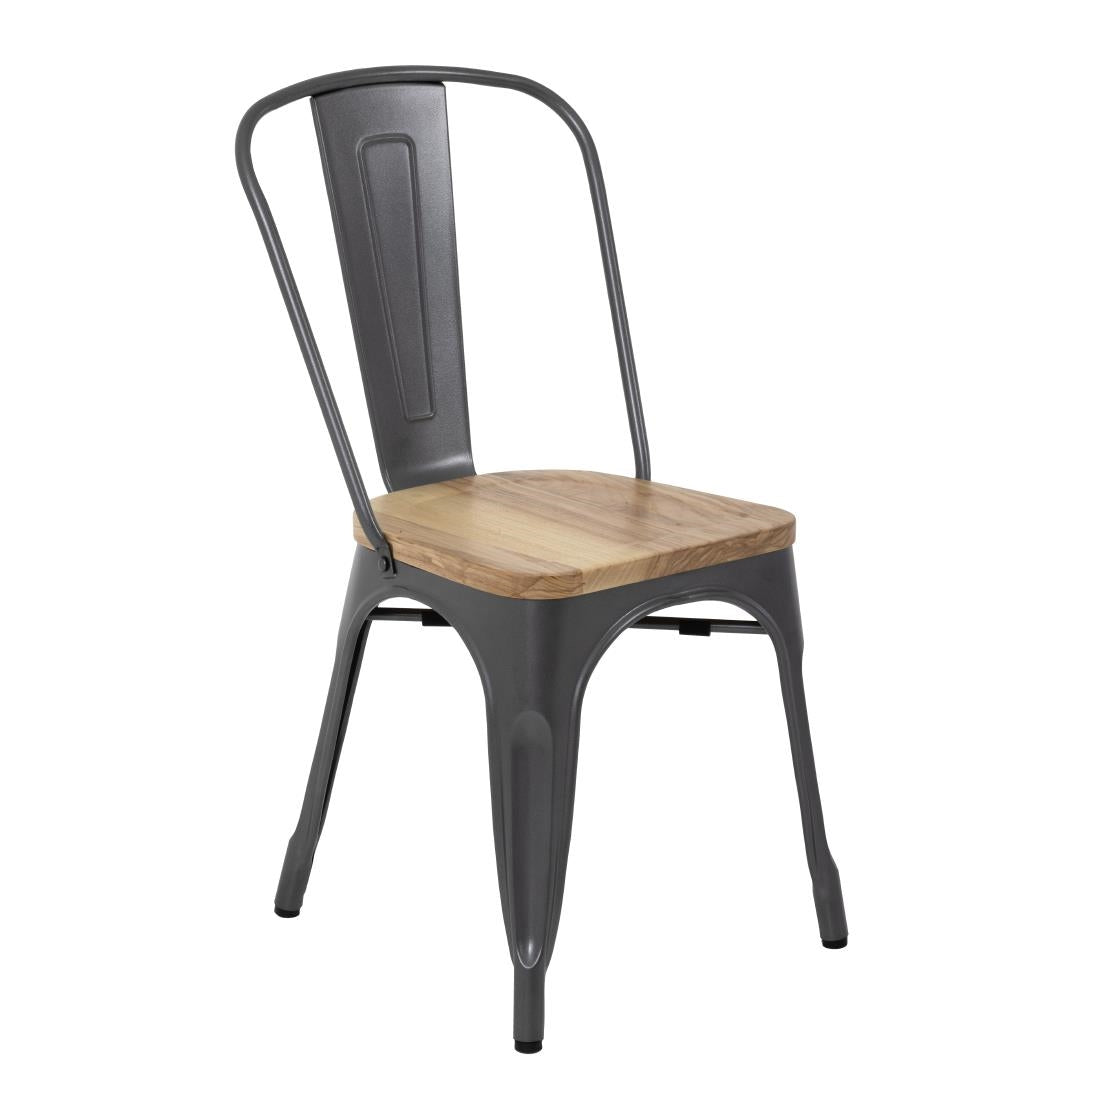 Bolero Bistro Side Chairs with Wooden Seat Pad Gun Metal (Pack of 4) JD Catering Equipment Solutions Ltd